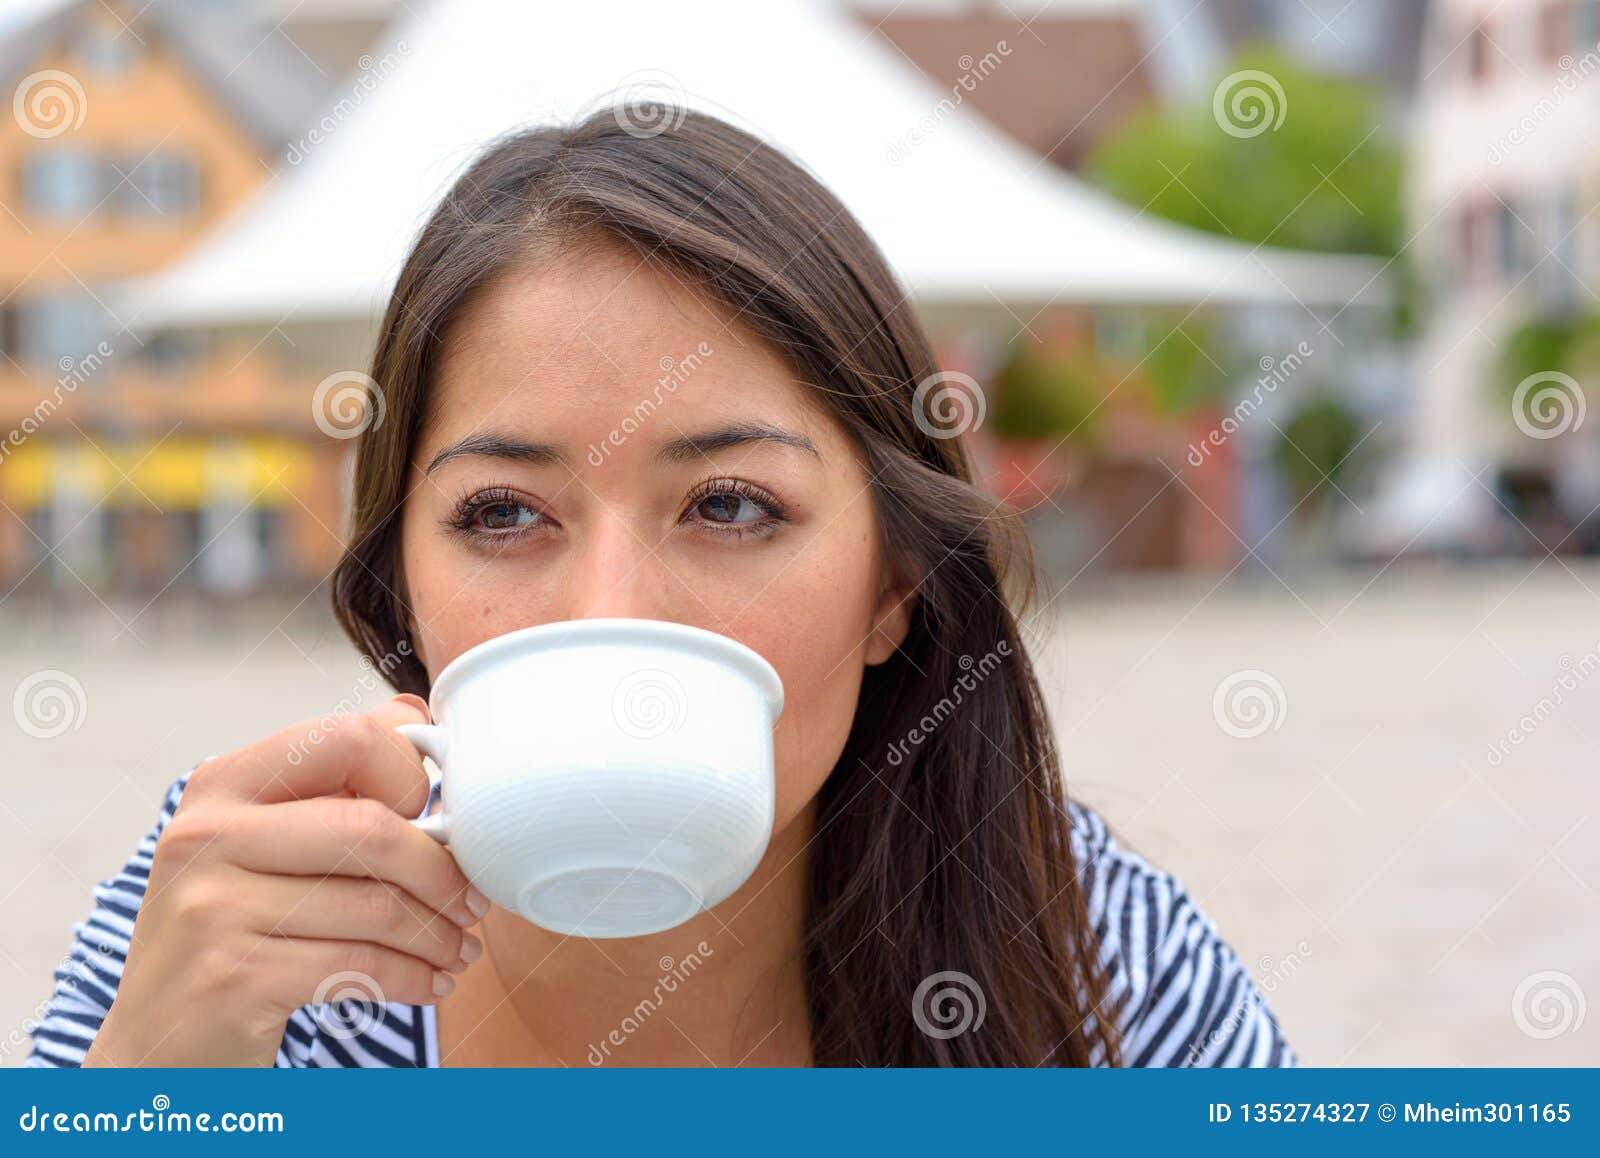 Young Woman Enjoying A Cup Of Coffee Or Tea Stock Image - Image of ...